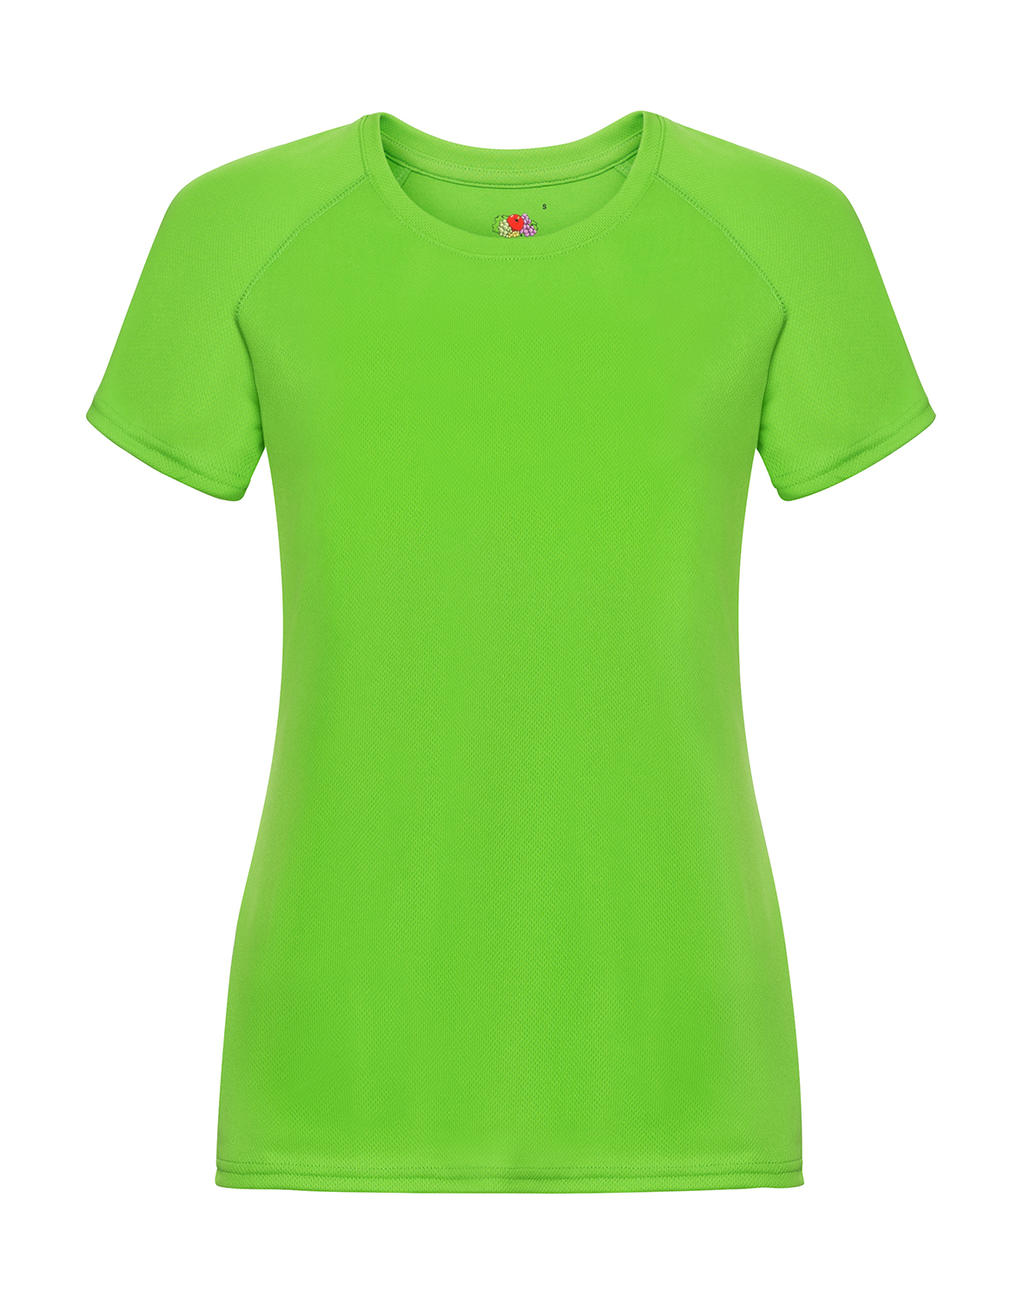  Ladies Performance T in Farbe Lime Green